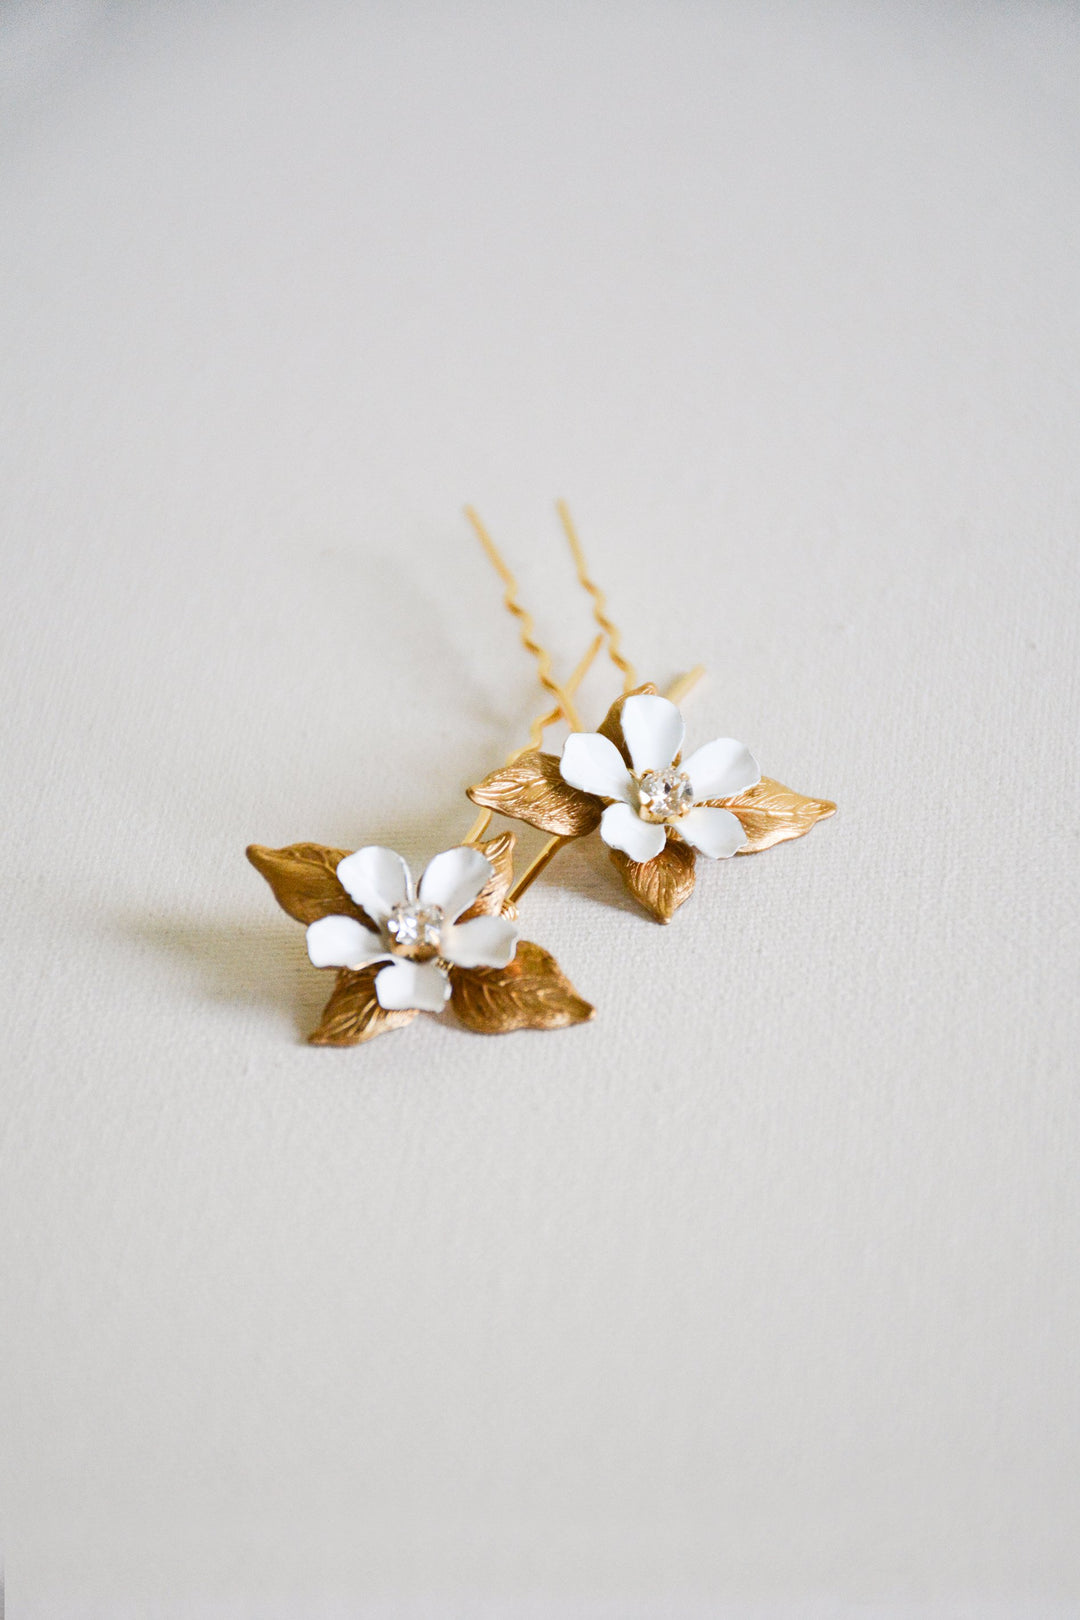 Floral hair pins in gold.